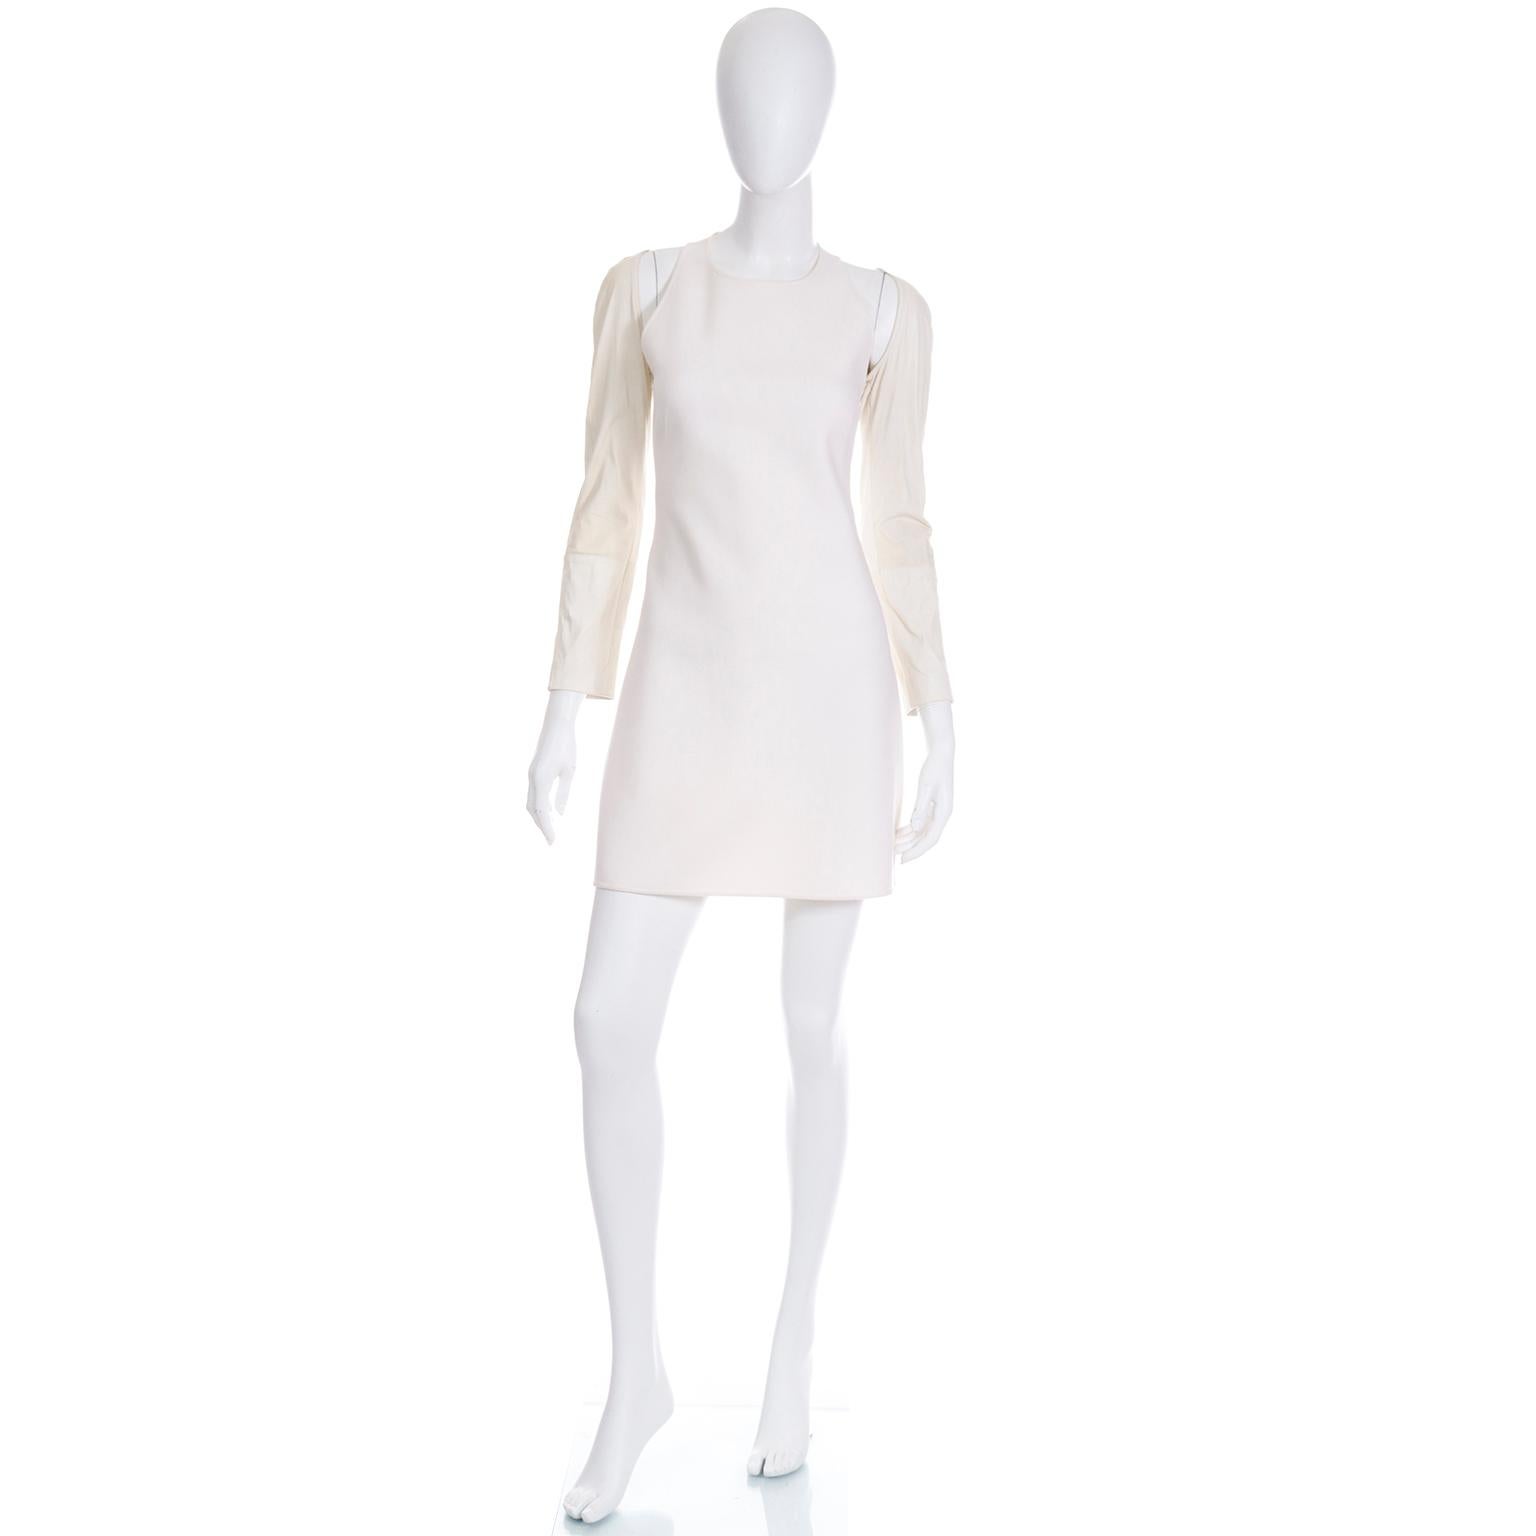 This Kaufmanfranco ivory stretch crepe dress has fun cutouts in the bodice and fabulous cream leather sleeves. We love the interesting seam details that define the silhouette. Closes with a hidden back center zipper. 
The dress body is made of a